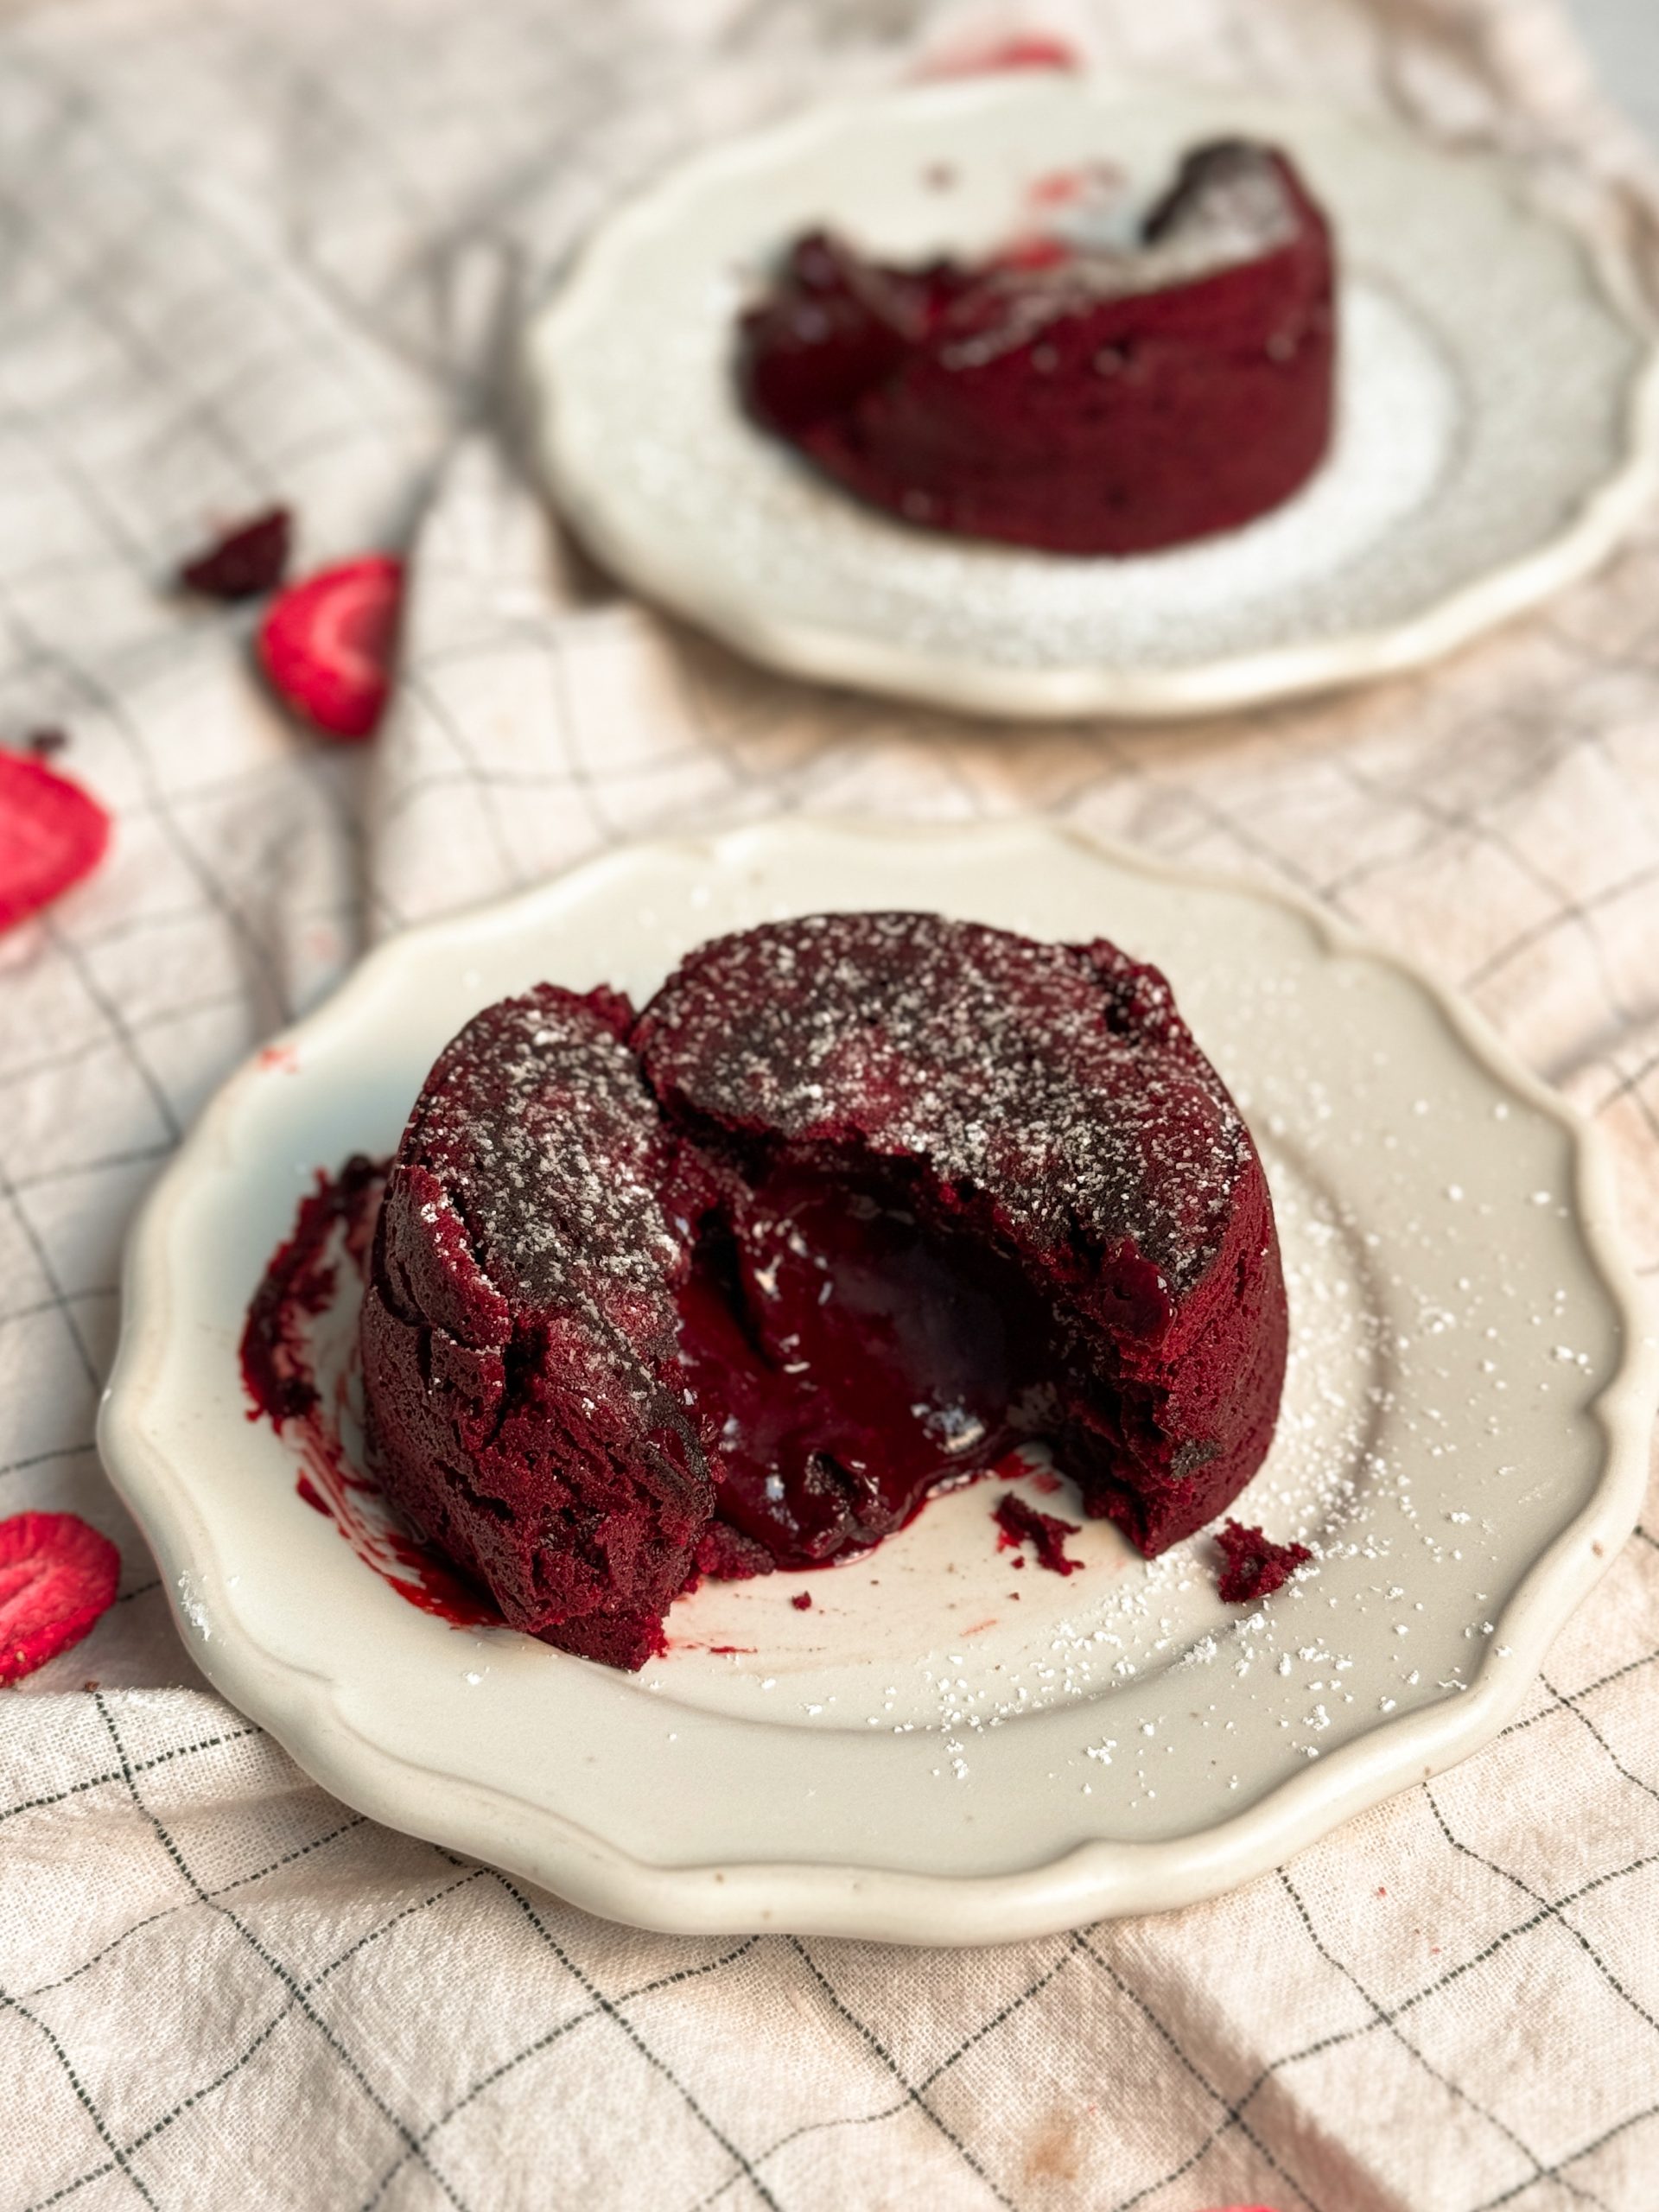 red velvet molten lava cake on a small plate that has been cut into half to let the molten red center ooze out